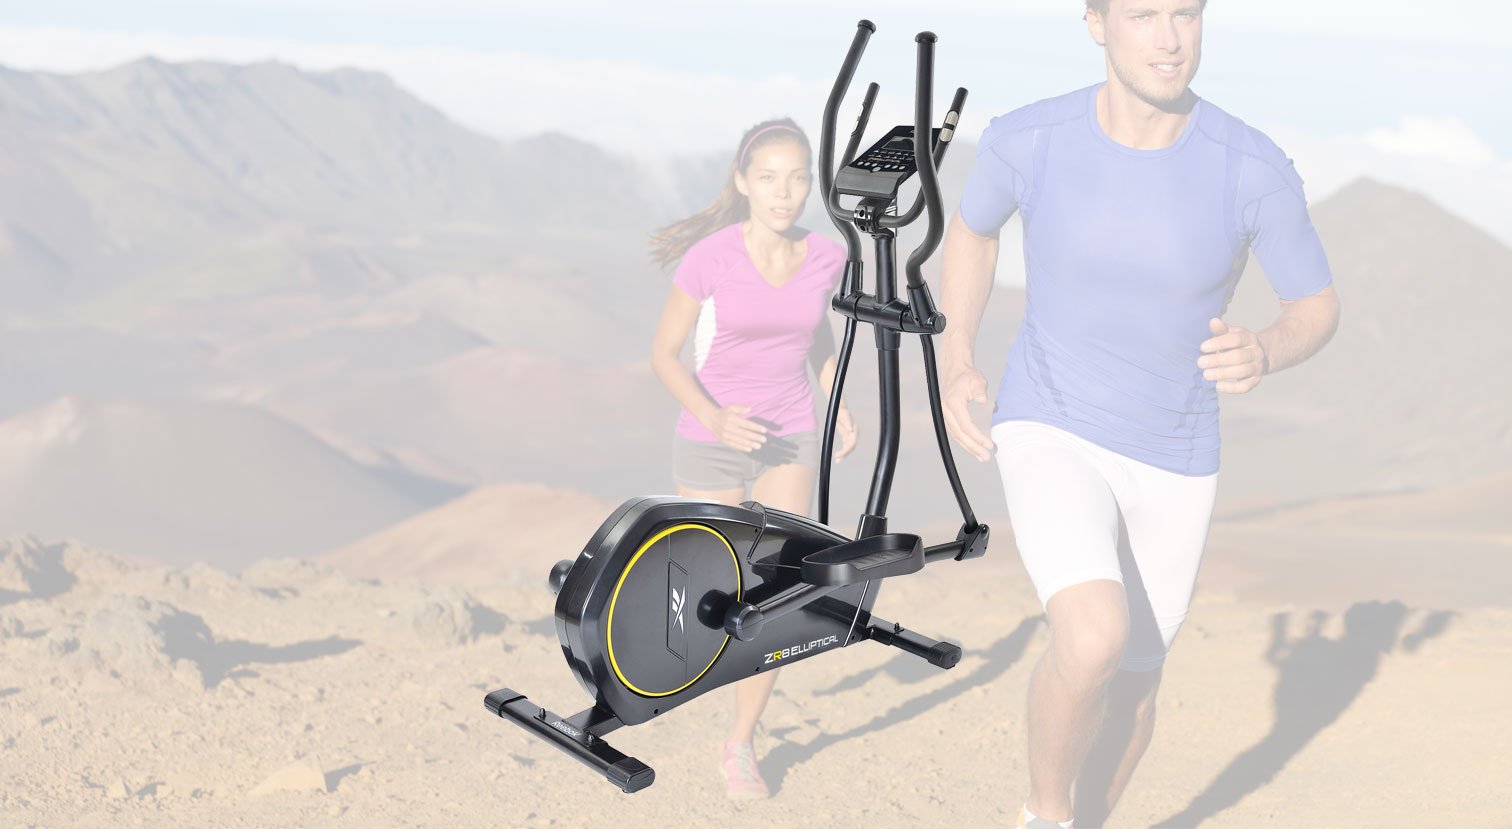 Reebok ZR8 Cross Trainer Review - Does the ZR8 Perform it Matters? - Gym Tech Review - Reviews of the Latest Gym Equipment